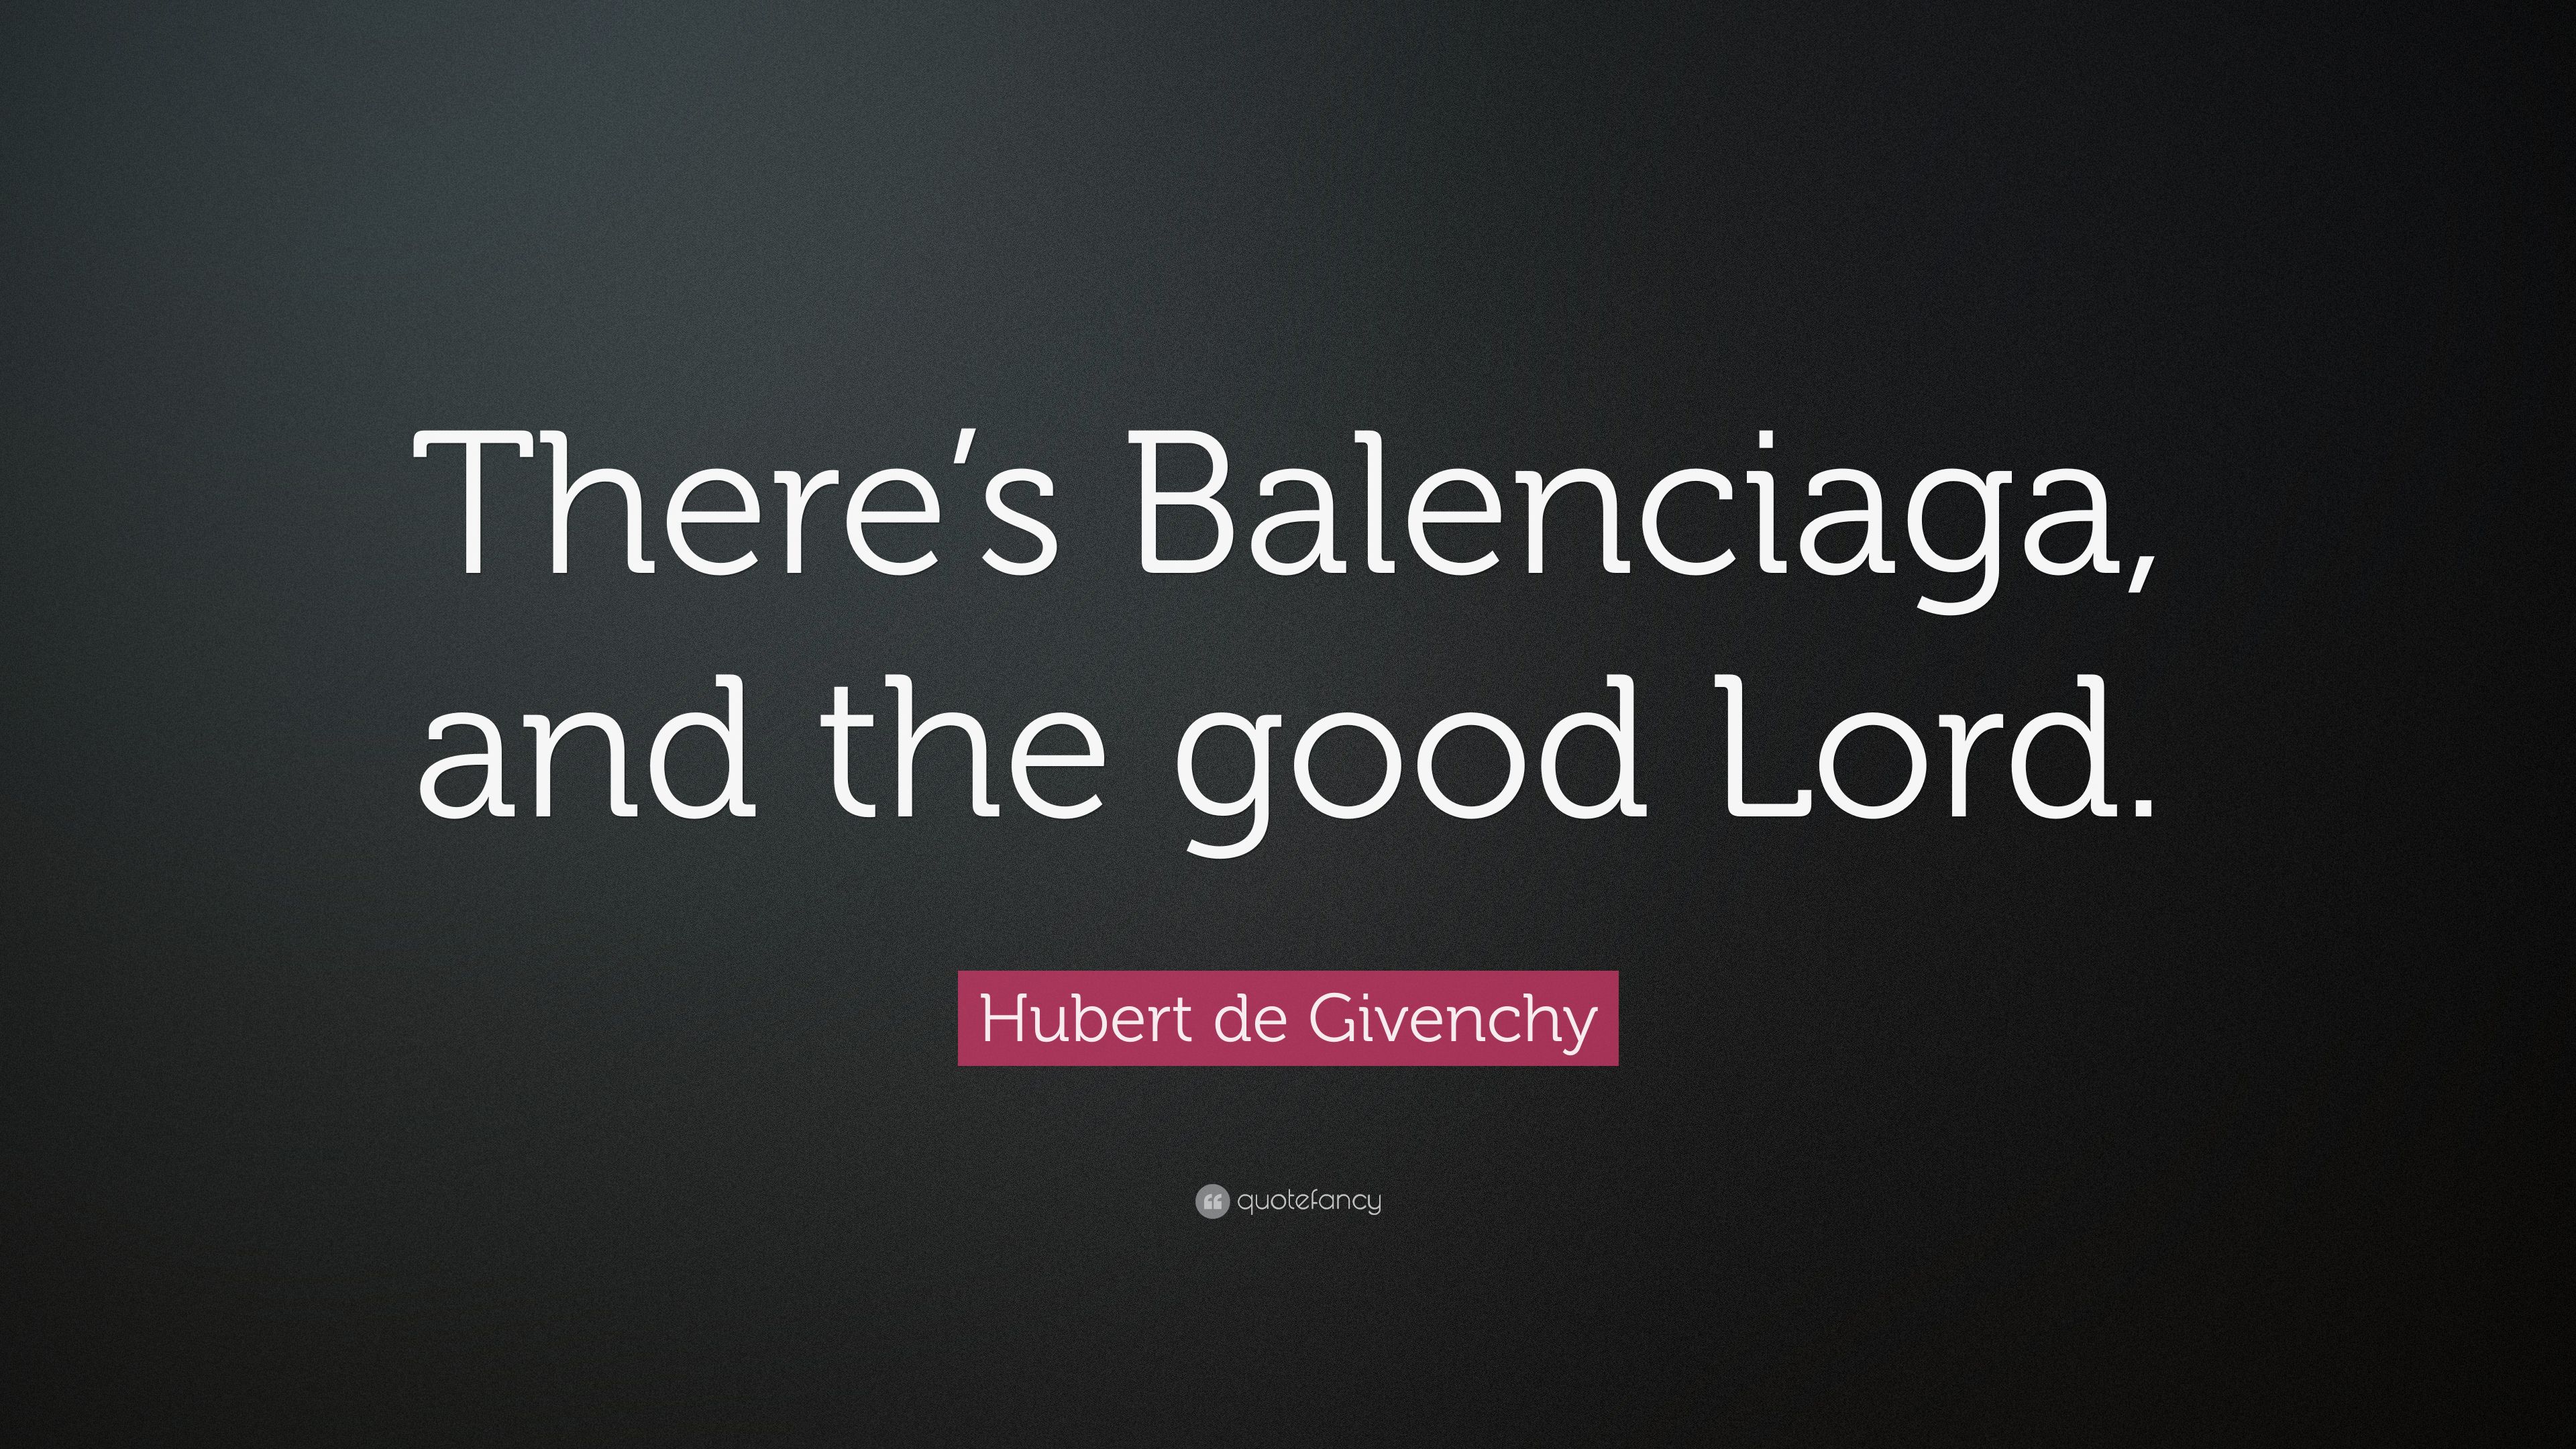 Hubert de Givenchy Quote: “There's Balenciaga, and the good Lord